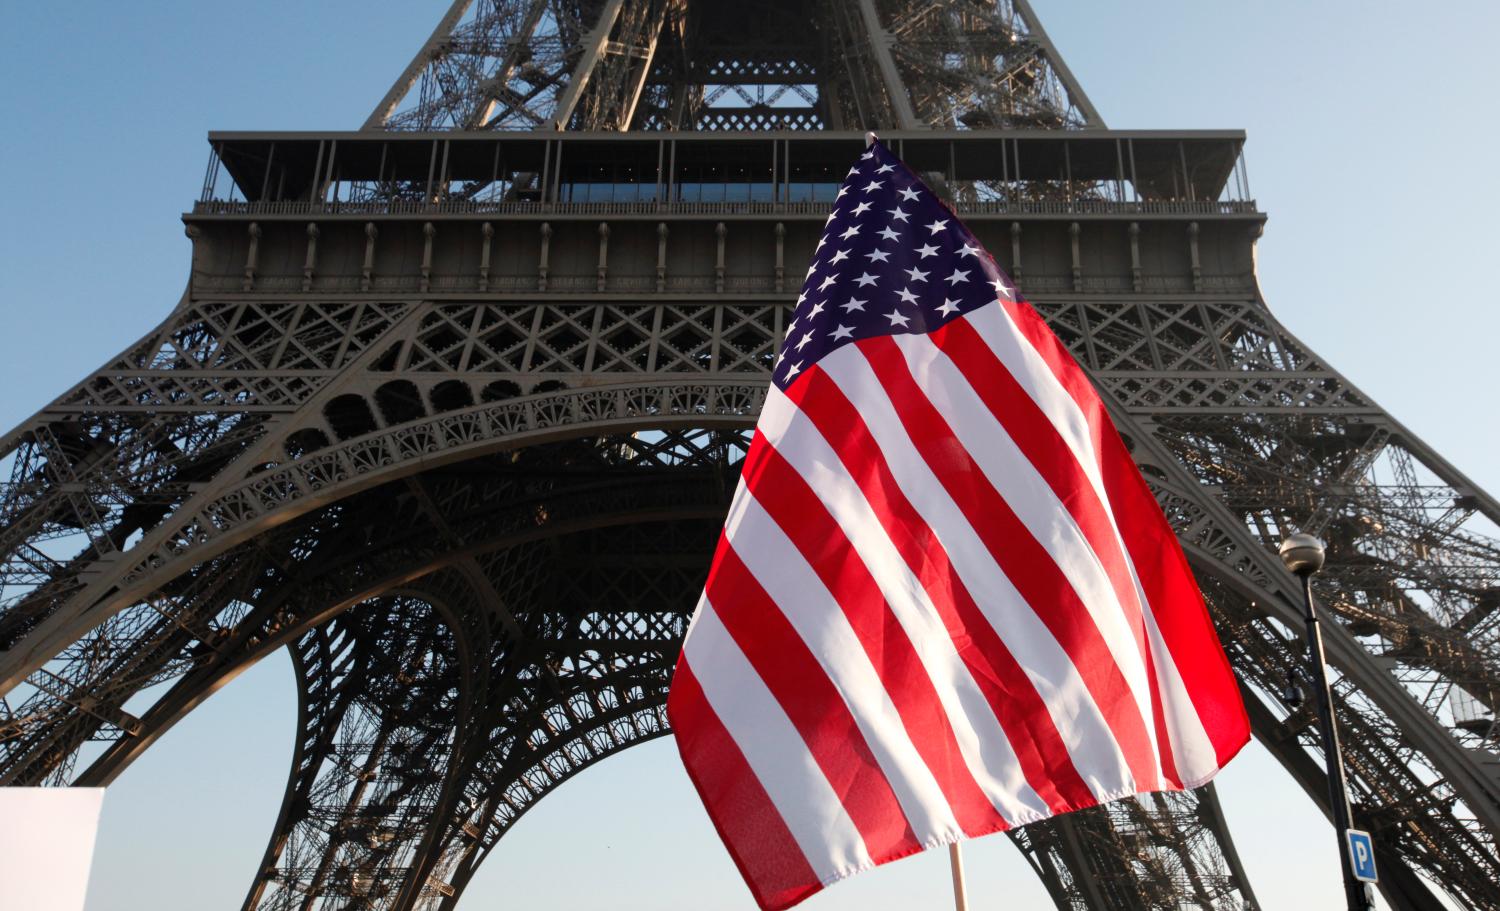 An American flag is seen during a Women's March near the Eiffel Tower in Paris